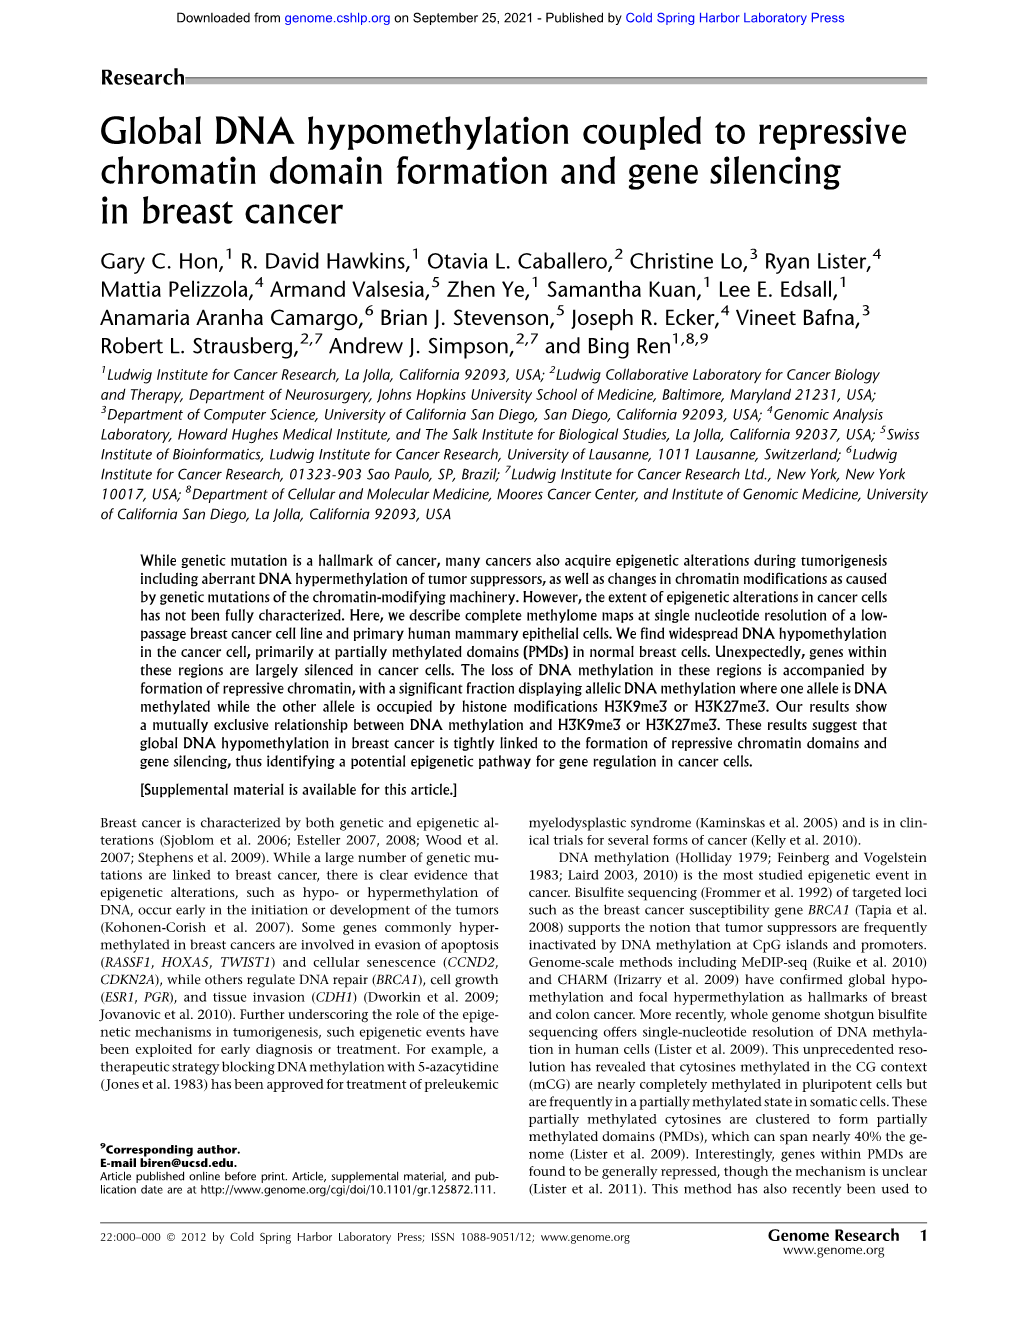 Global DNA Hypomethylation Coupled to Repressive Chromatin Domain Formation and Gene Silencing in Breast Cancer